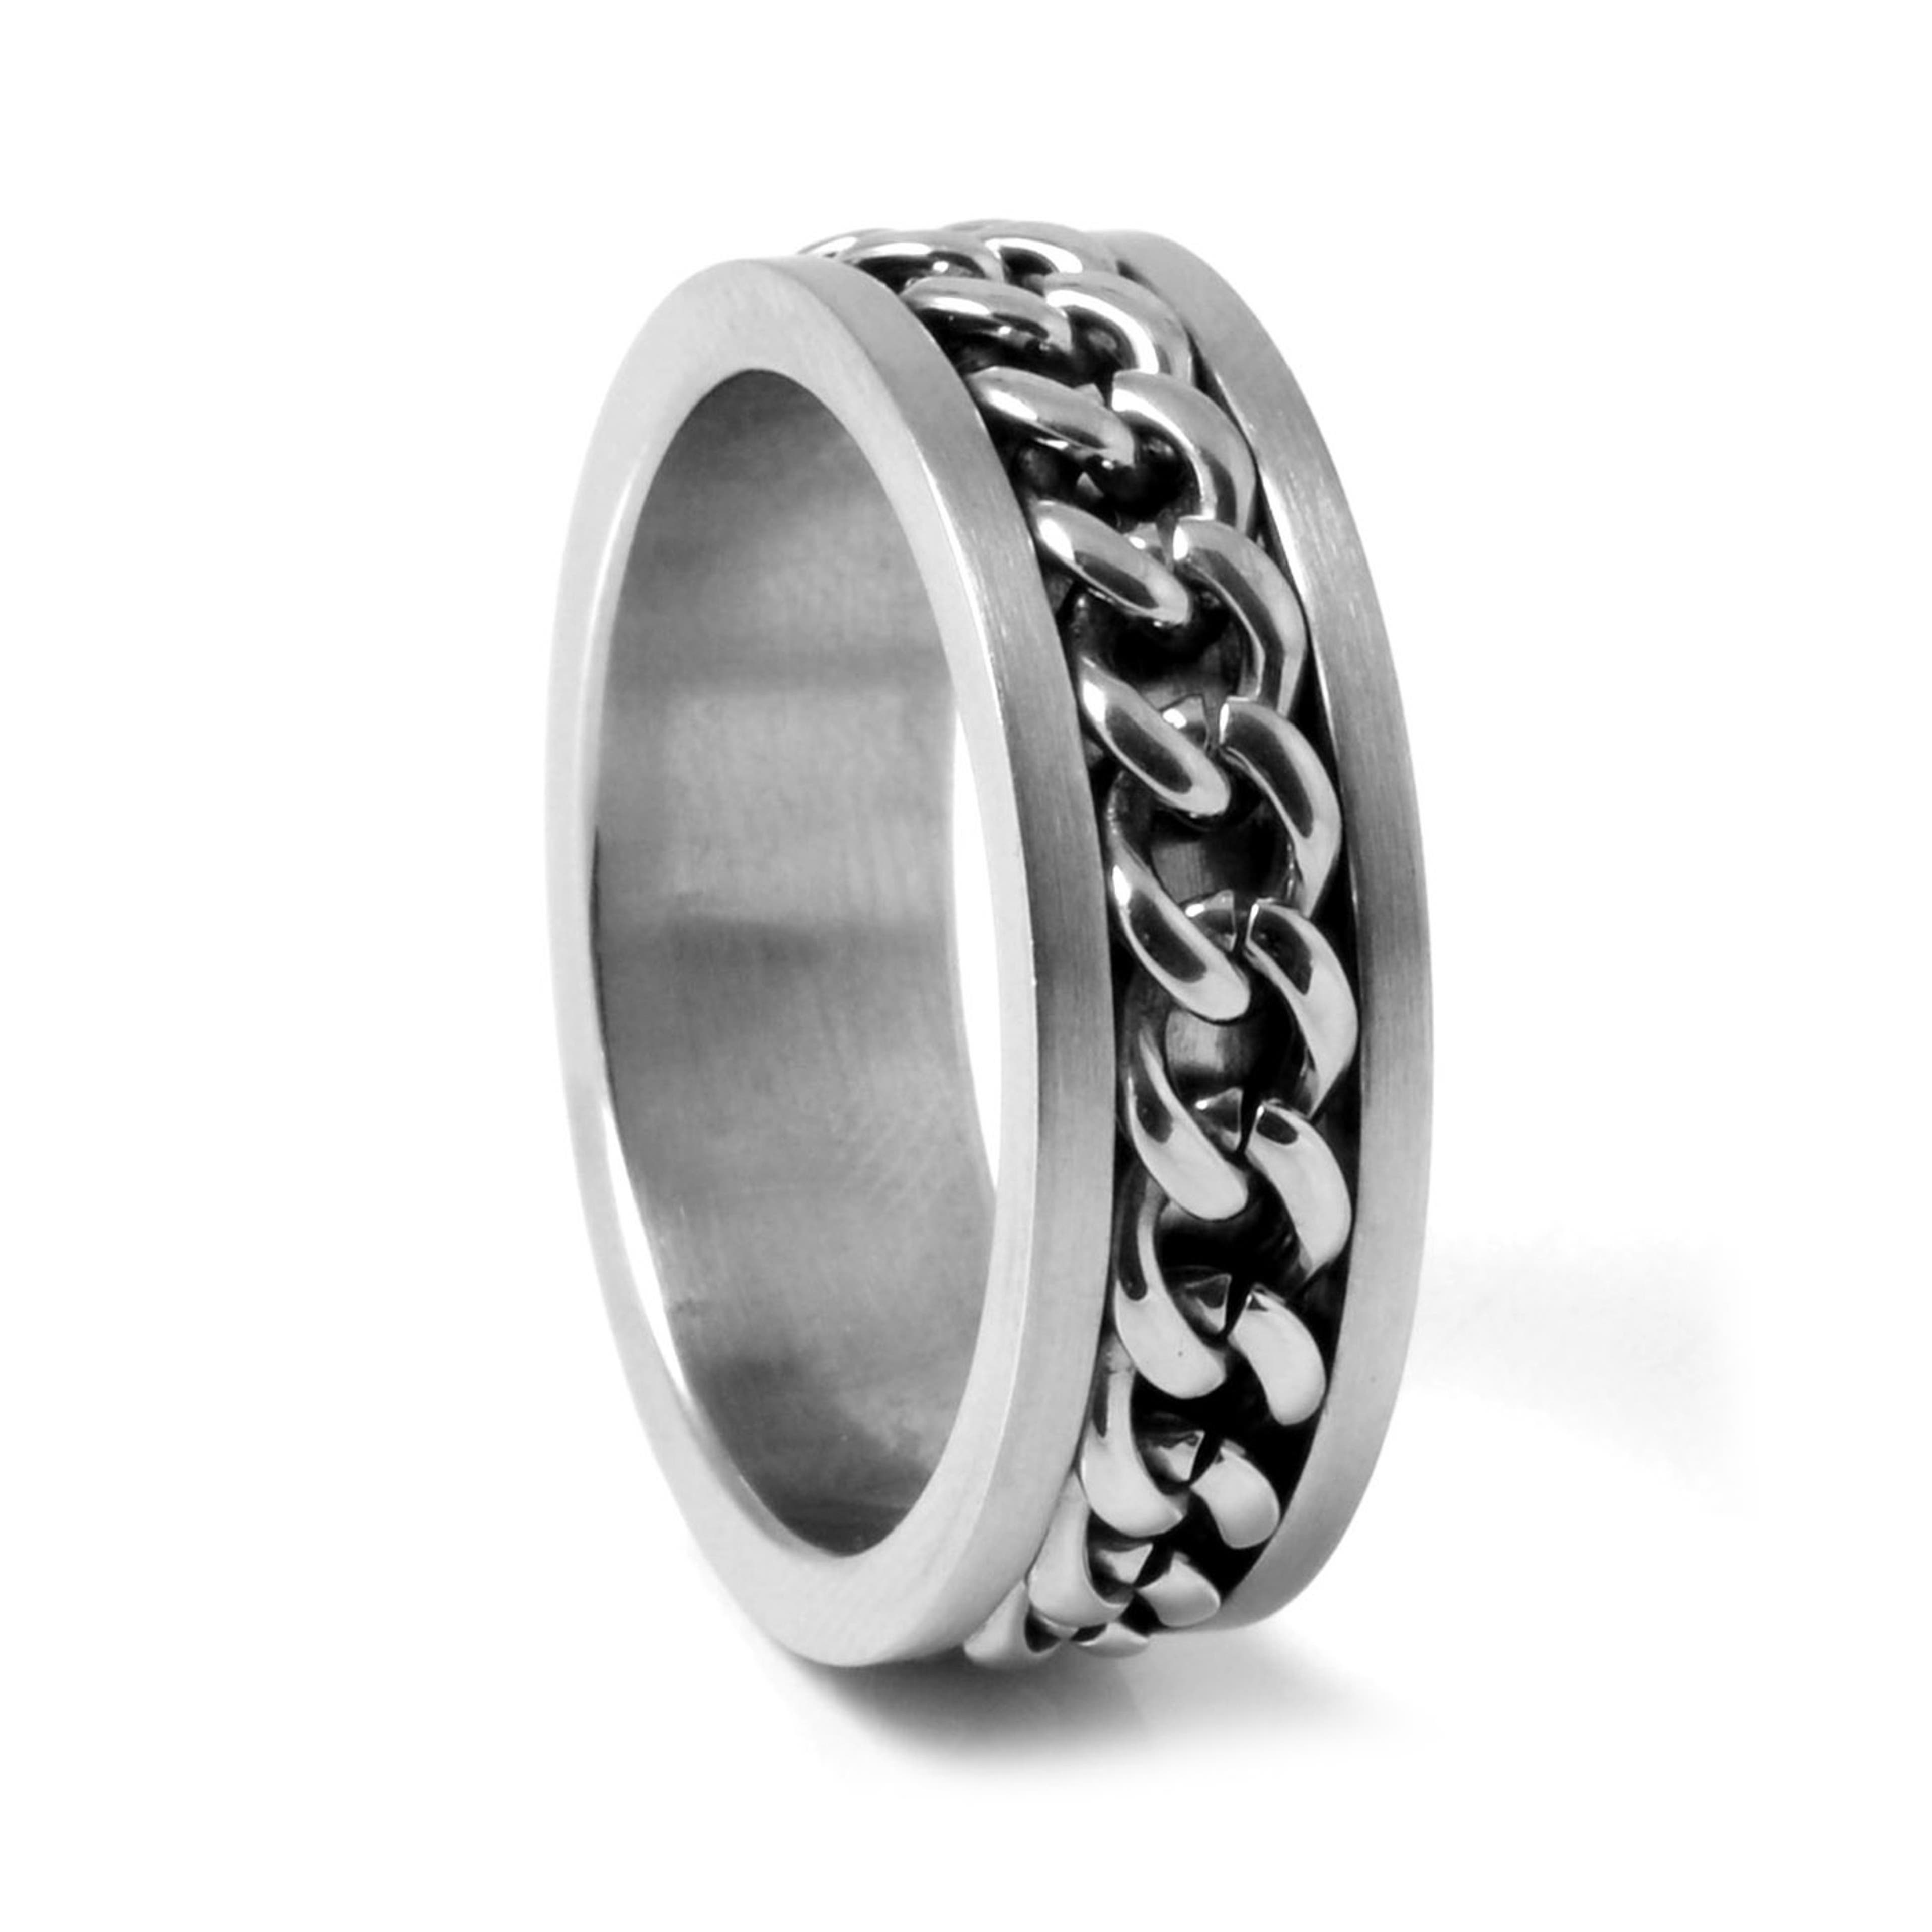 7 mm Matte Silver-Tone Stainless Steel Classic Ring